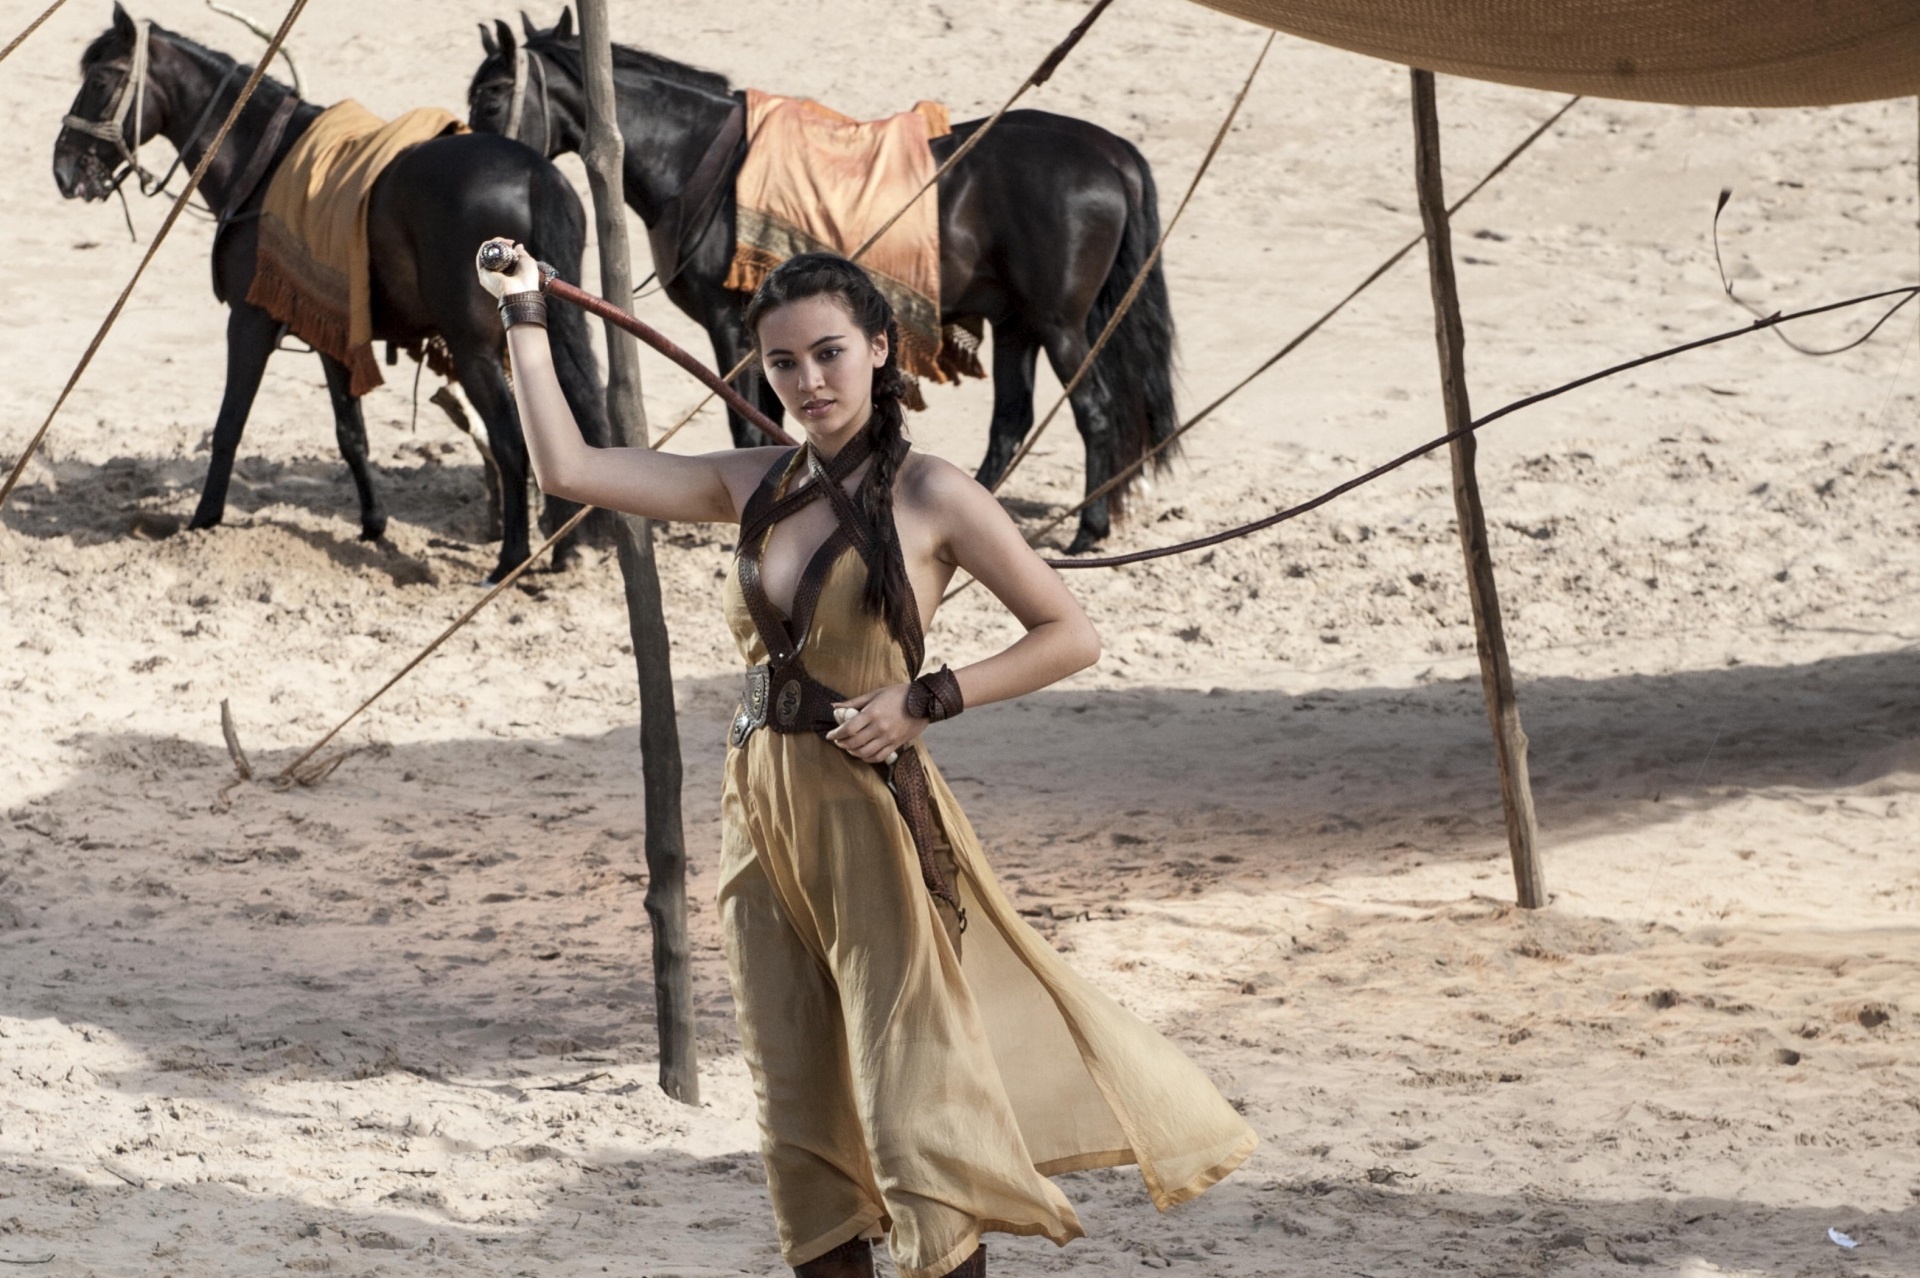 Jessica Henwick: An actress who joined the cast of the HBO series Game of Thrones as Nymeria Sand. 1920x1280 HD Wallpaper.